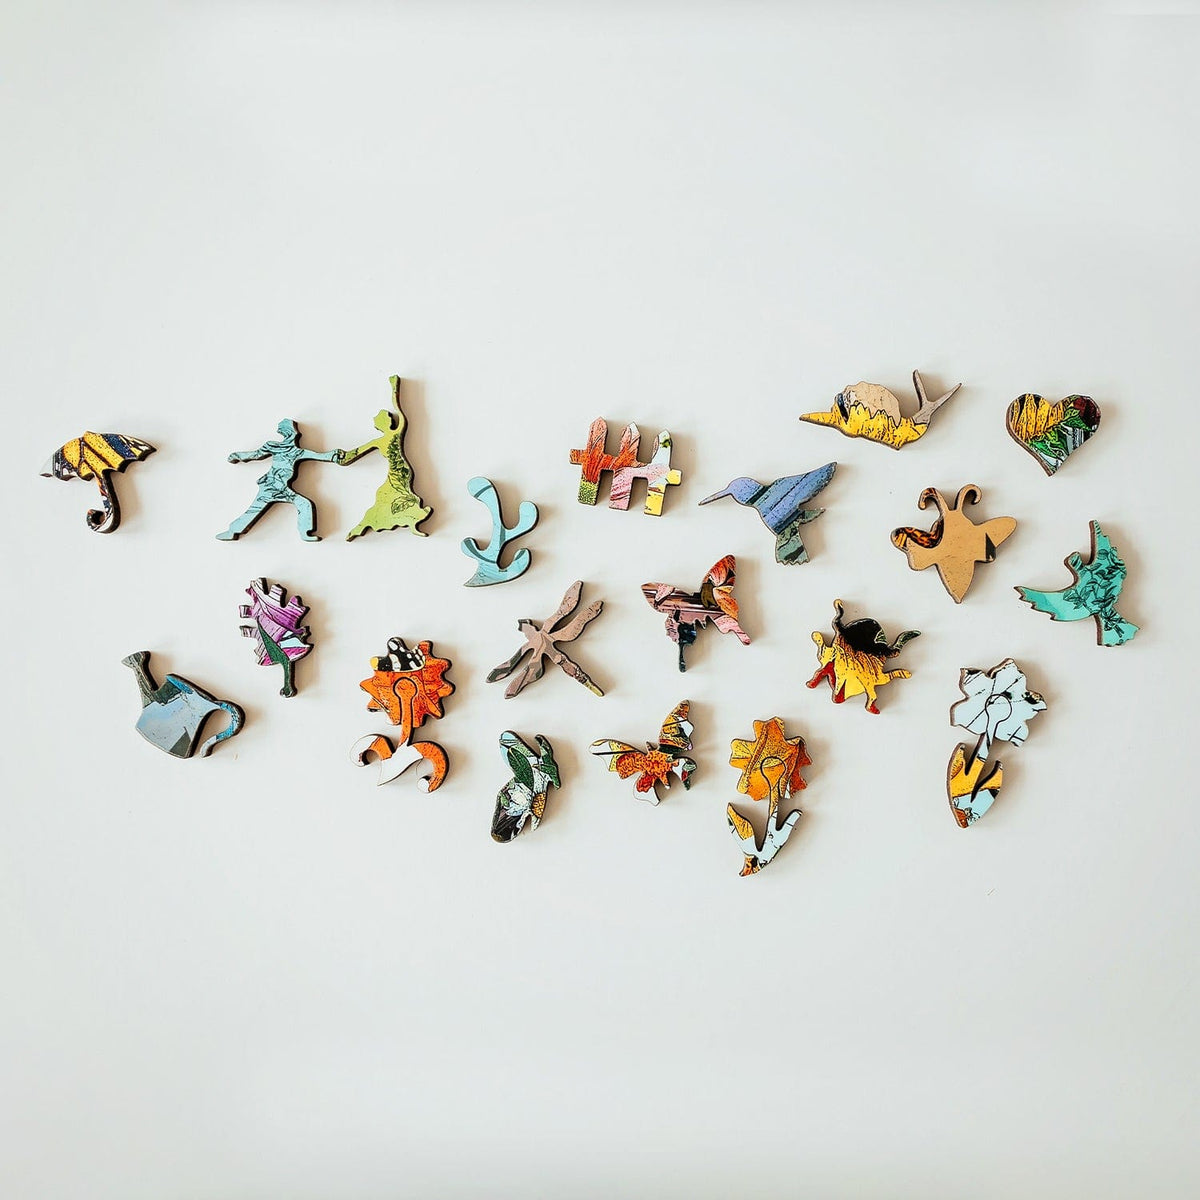 20 whimsical puzzle pieces from butterflies to birds